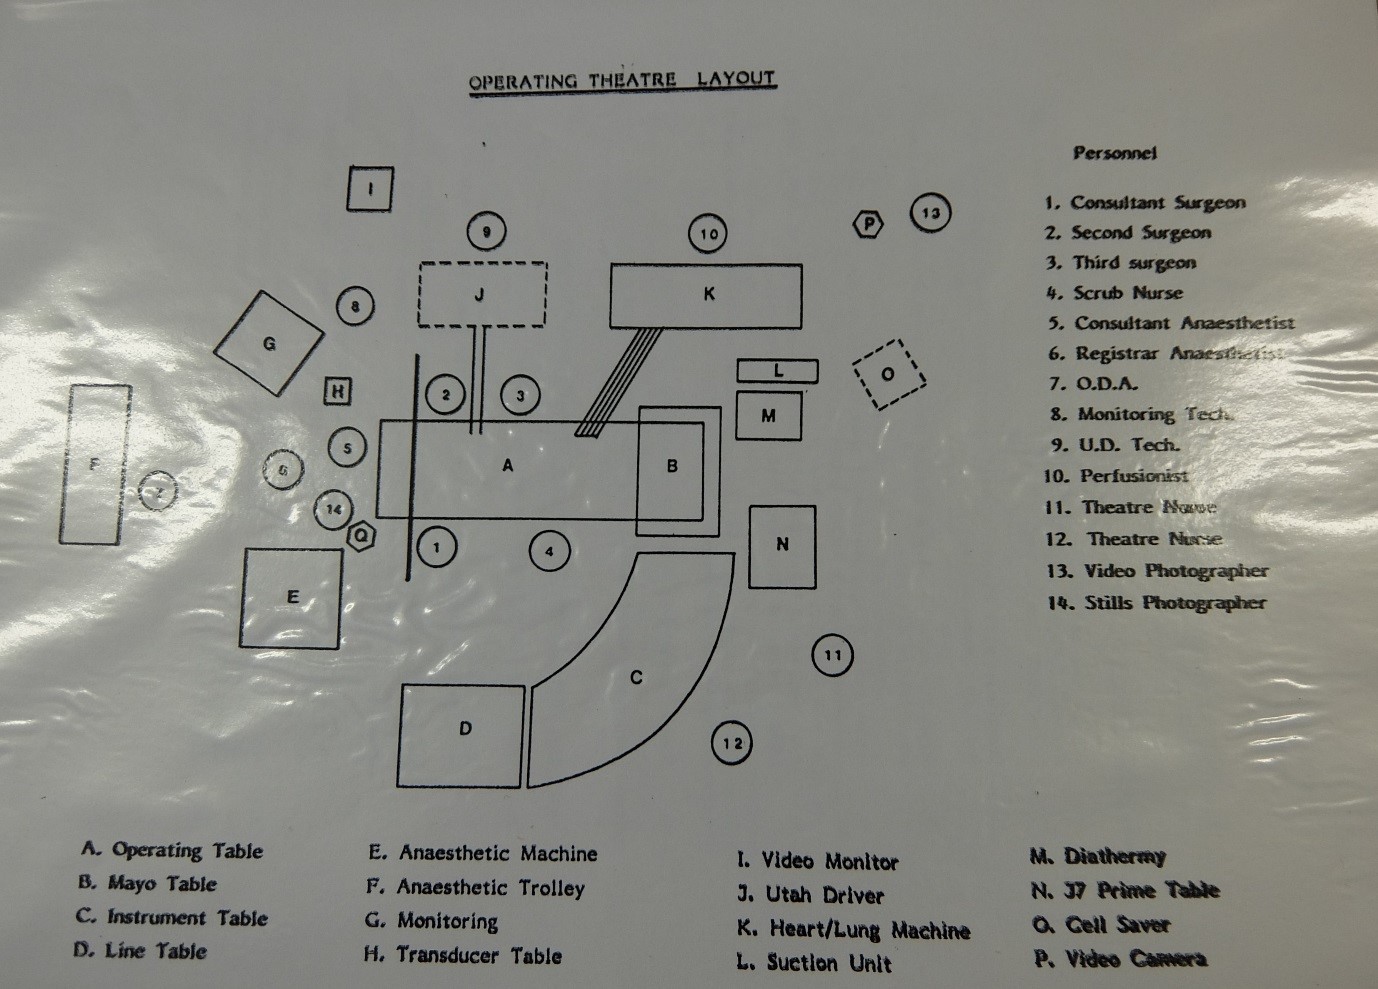 Plan showing the layout of the operating theatre